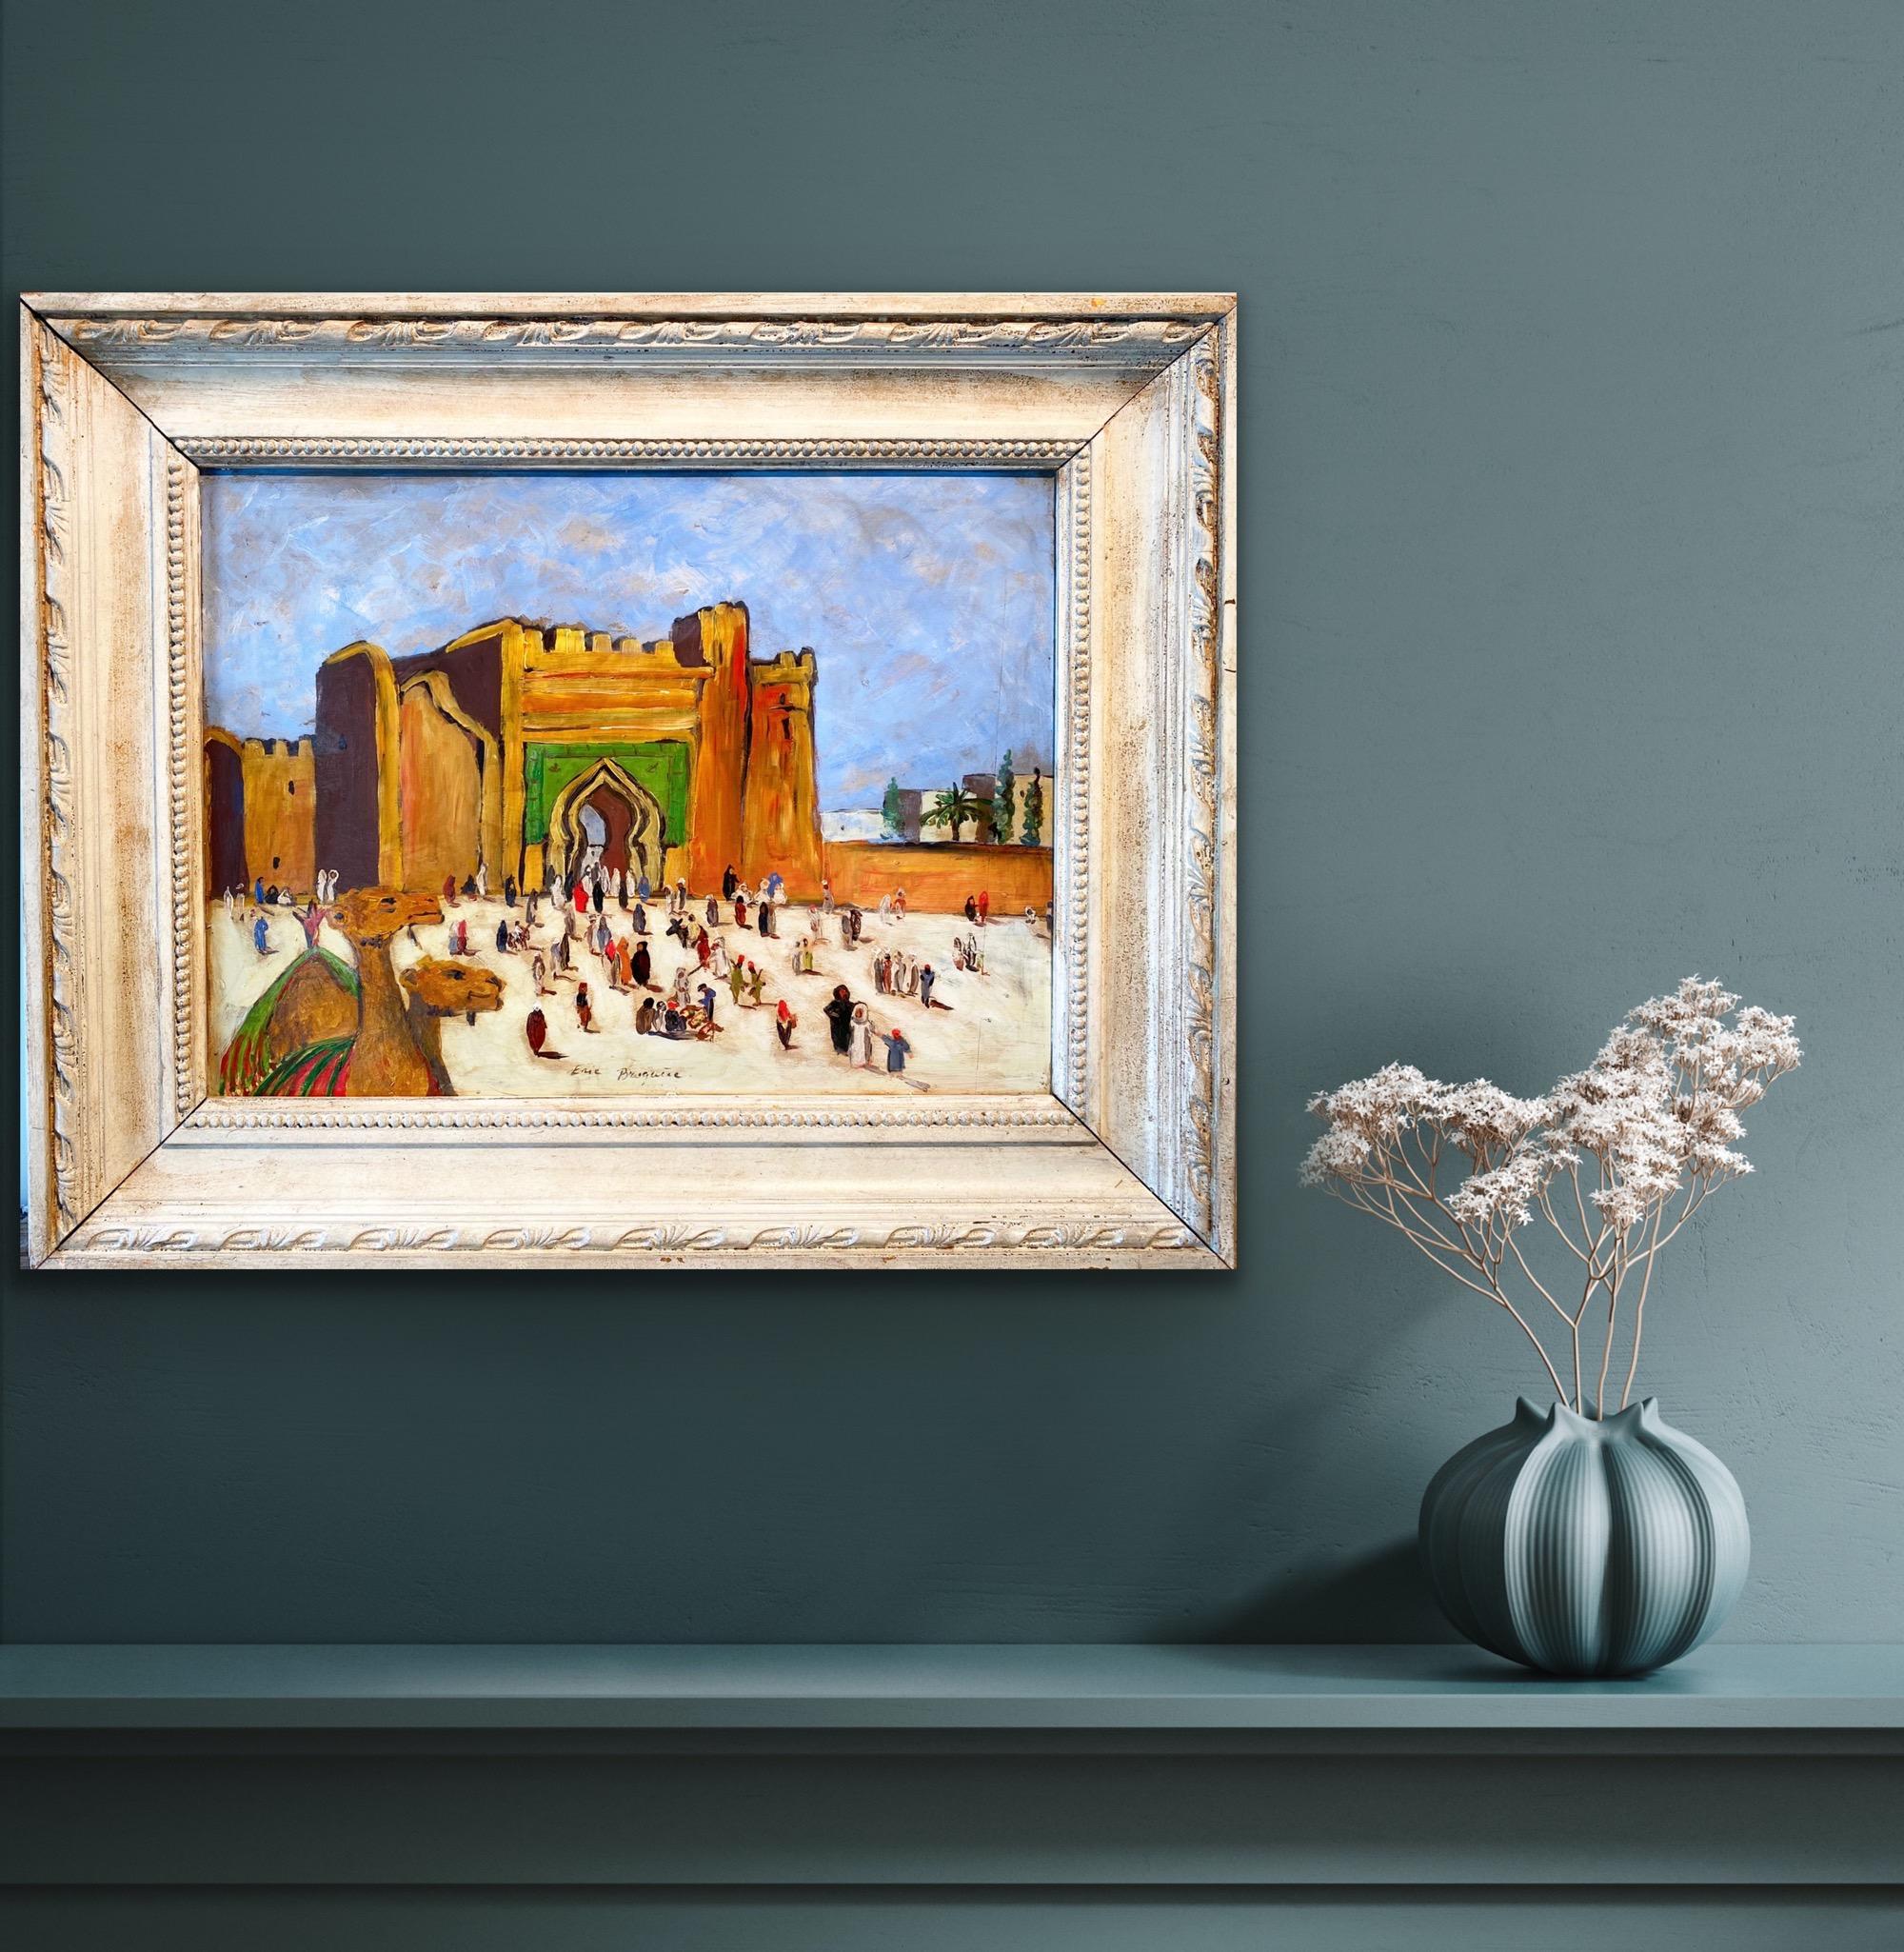 Antique oriental Cityscape painting with a camel - Morocco - Figurative Exotic - Beige Landscape Painting by Eric Bruguère